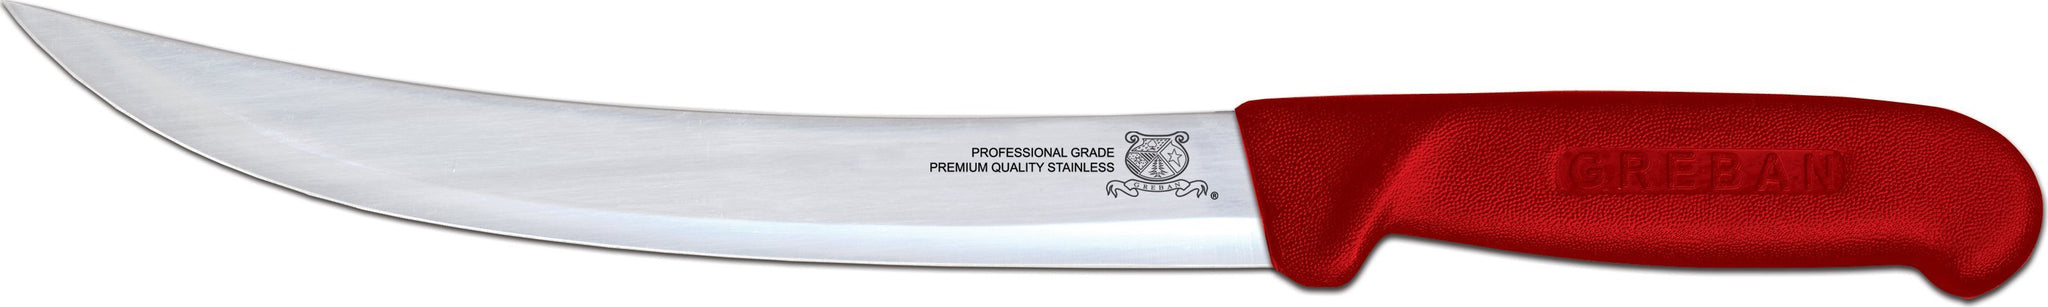 Omcan - 10” Breaking Knife with Red Polypropylene Handle, 10/cs - 12350